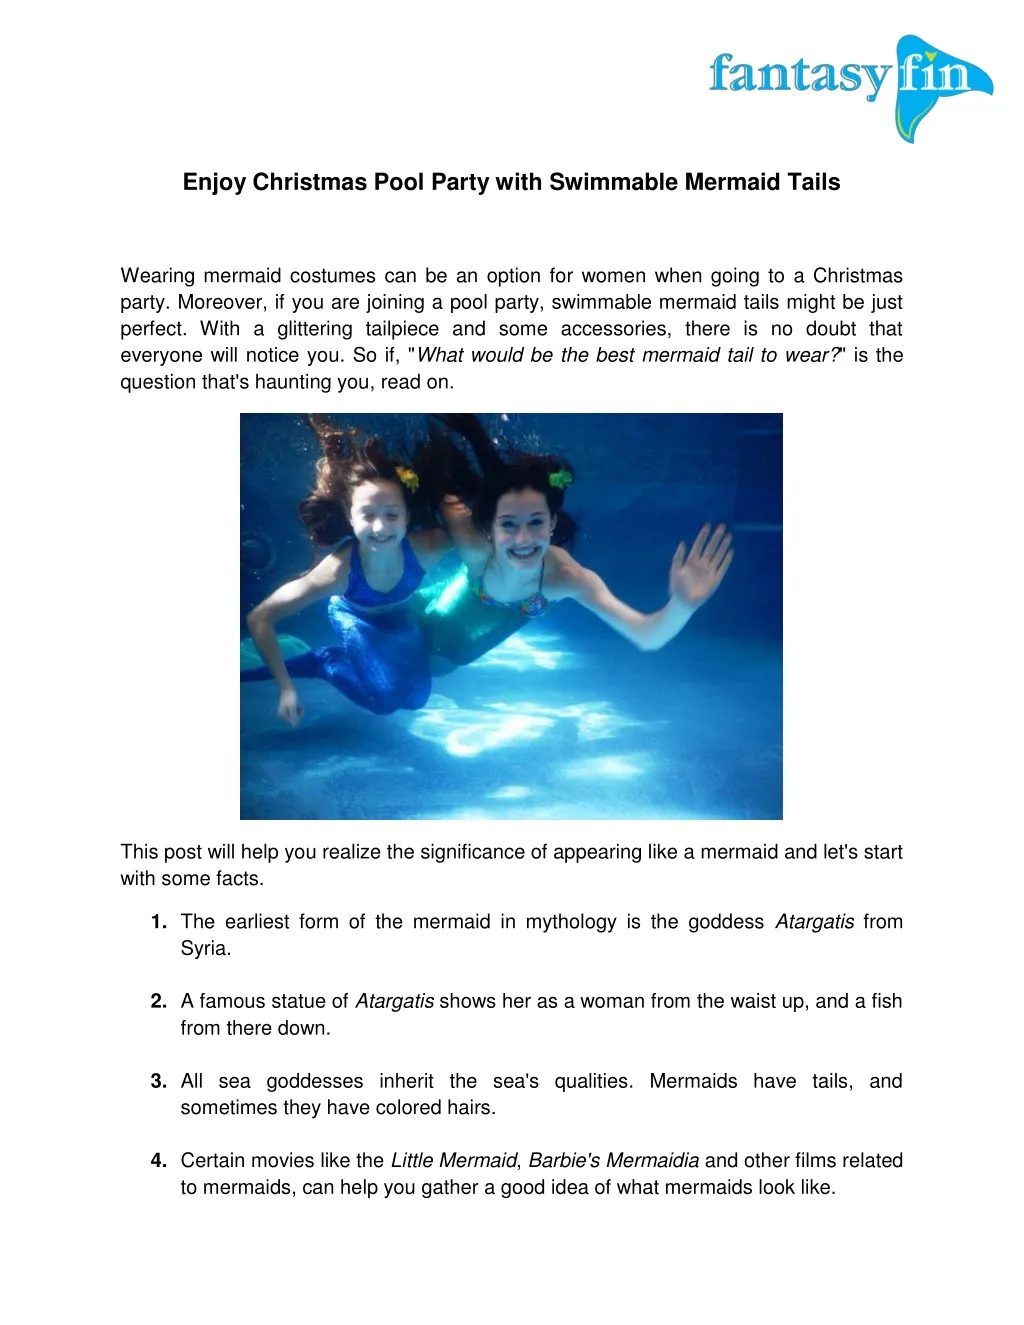 enjoy christmas pool party with swimmable mermaid